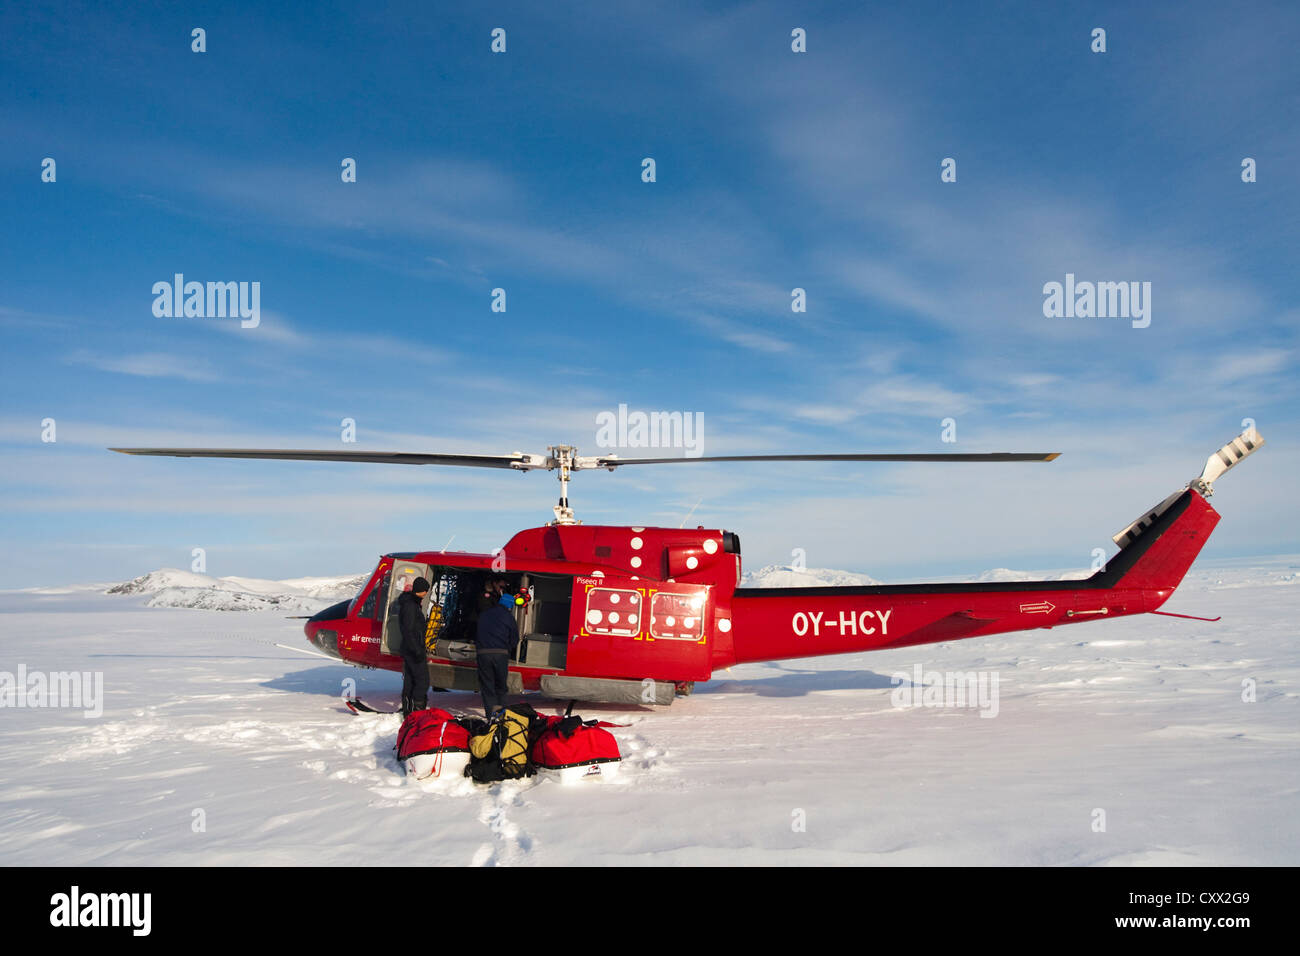 Helicopter on Inland Icecap, Greenland Stock Photo